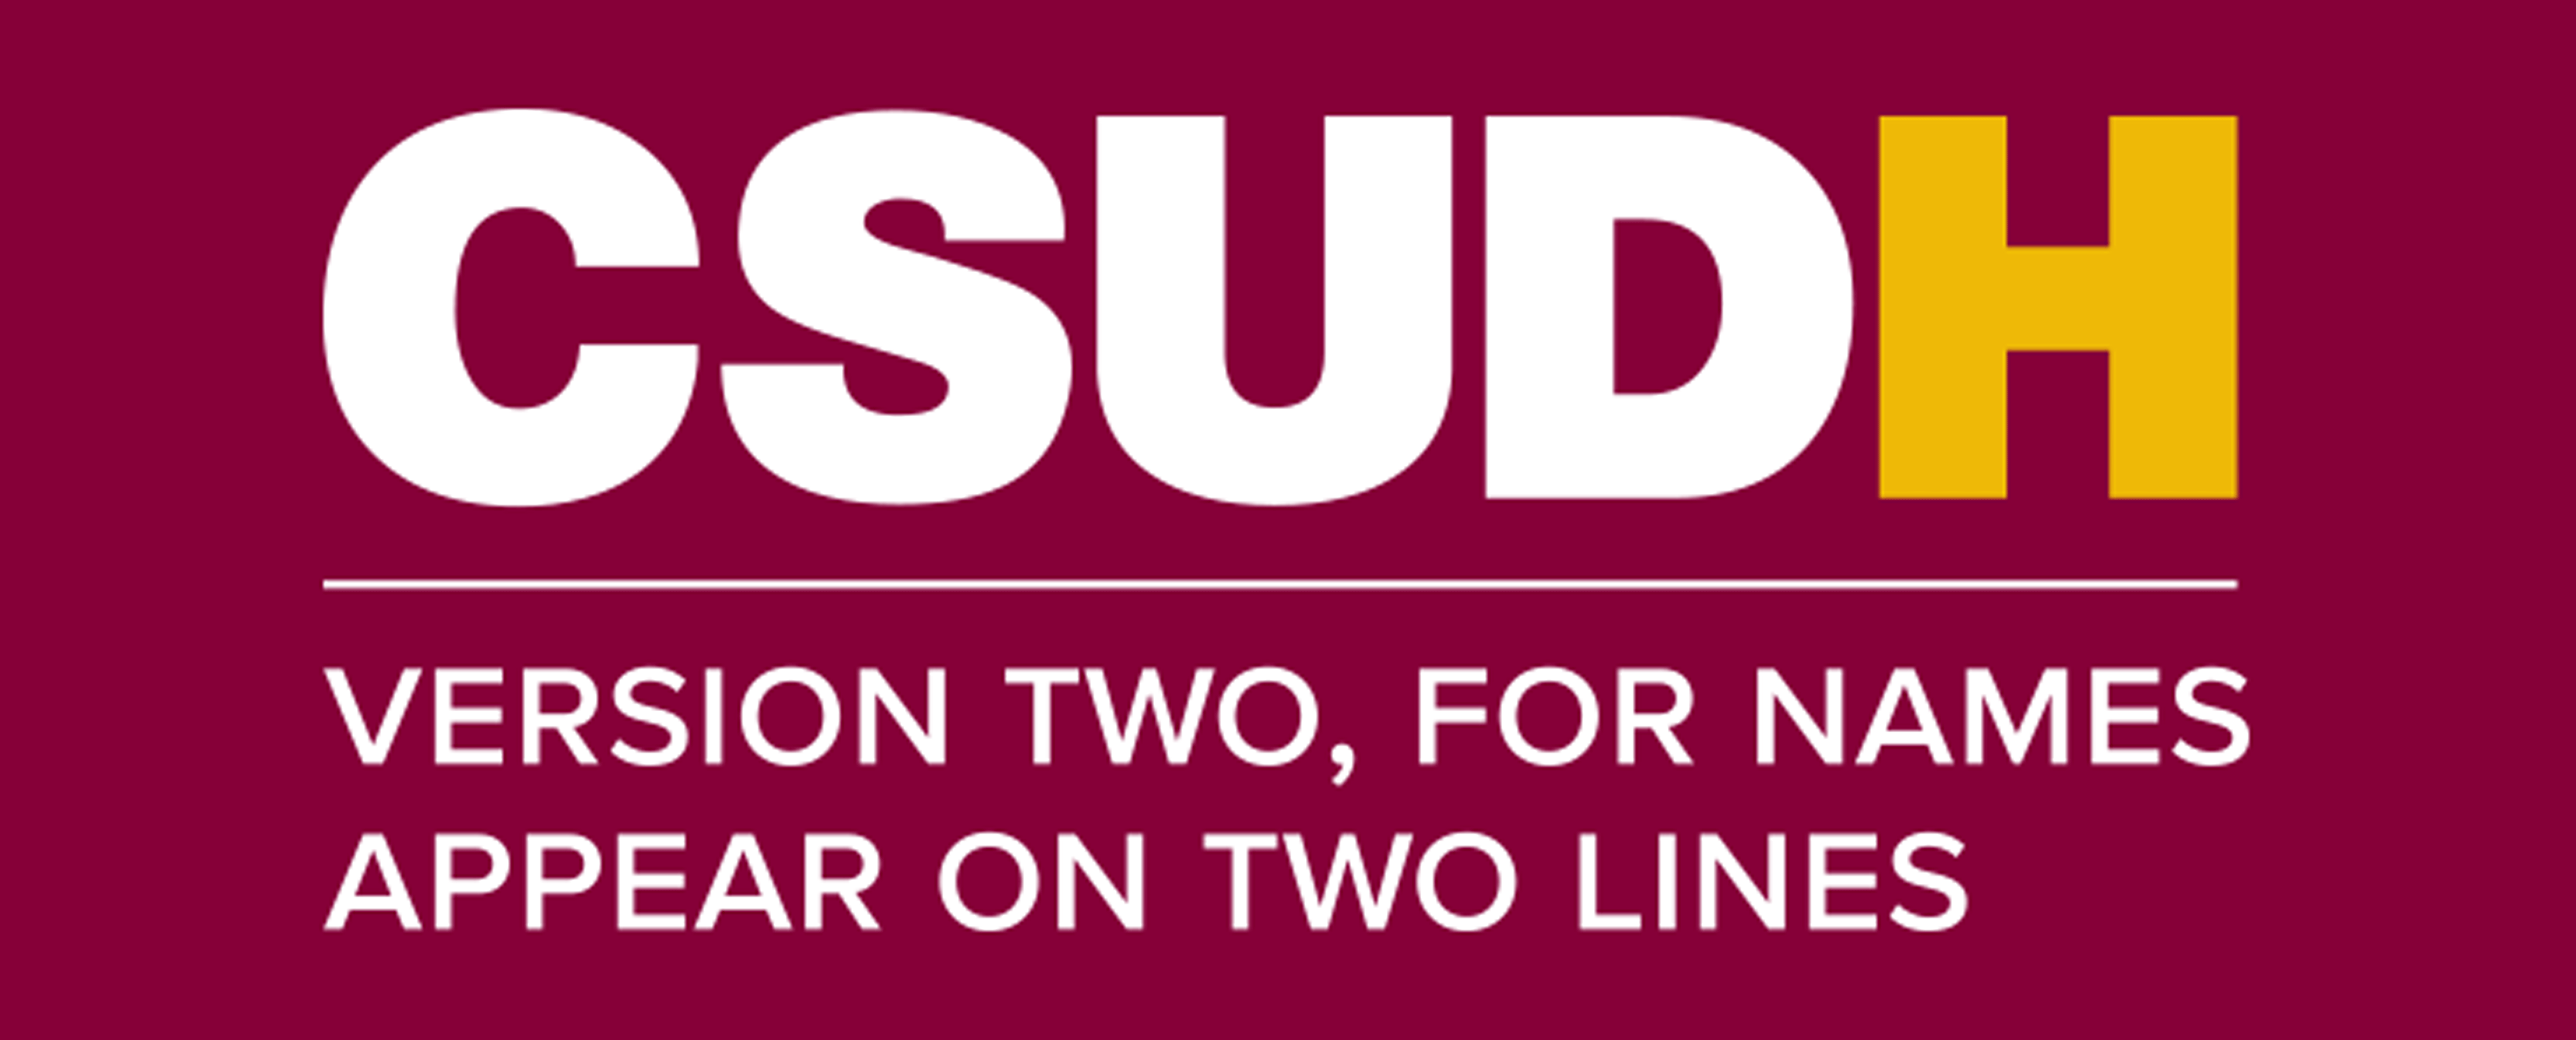 CSUDH endorsed logo stacked left aligned 2 lines white and yellow text on burgundy background